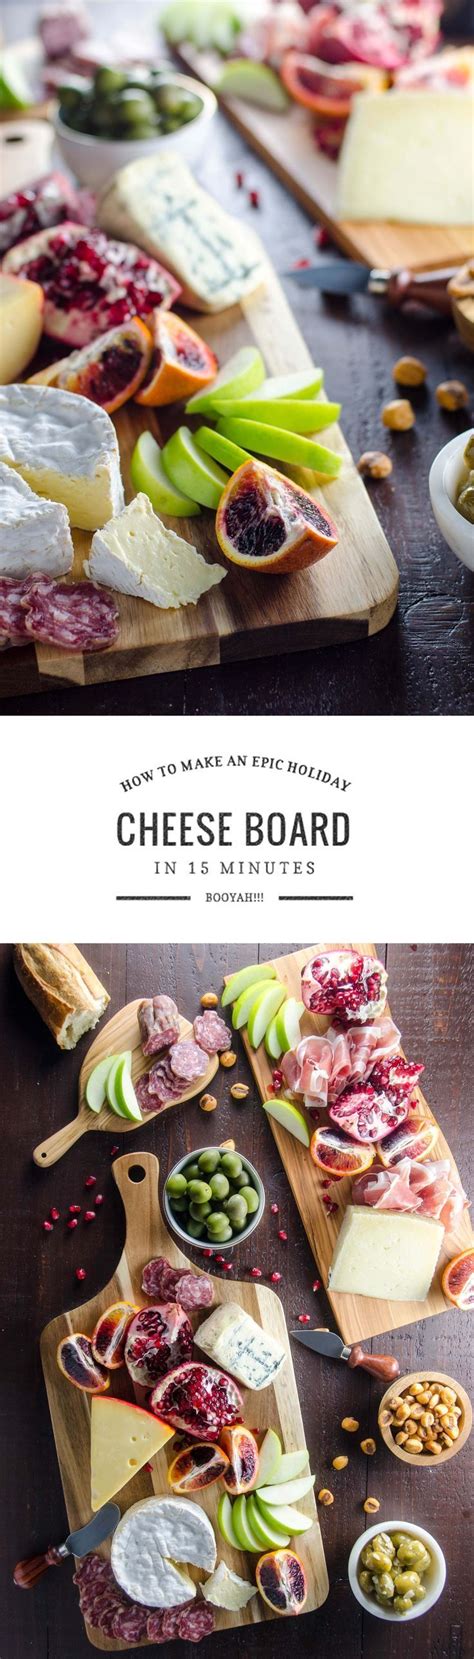 Cheese Platter 101 How To Make An Epic Cheese Board Recipe Easy